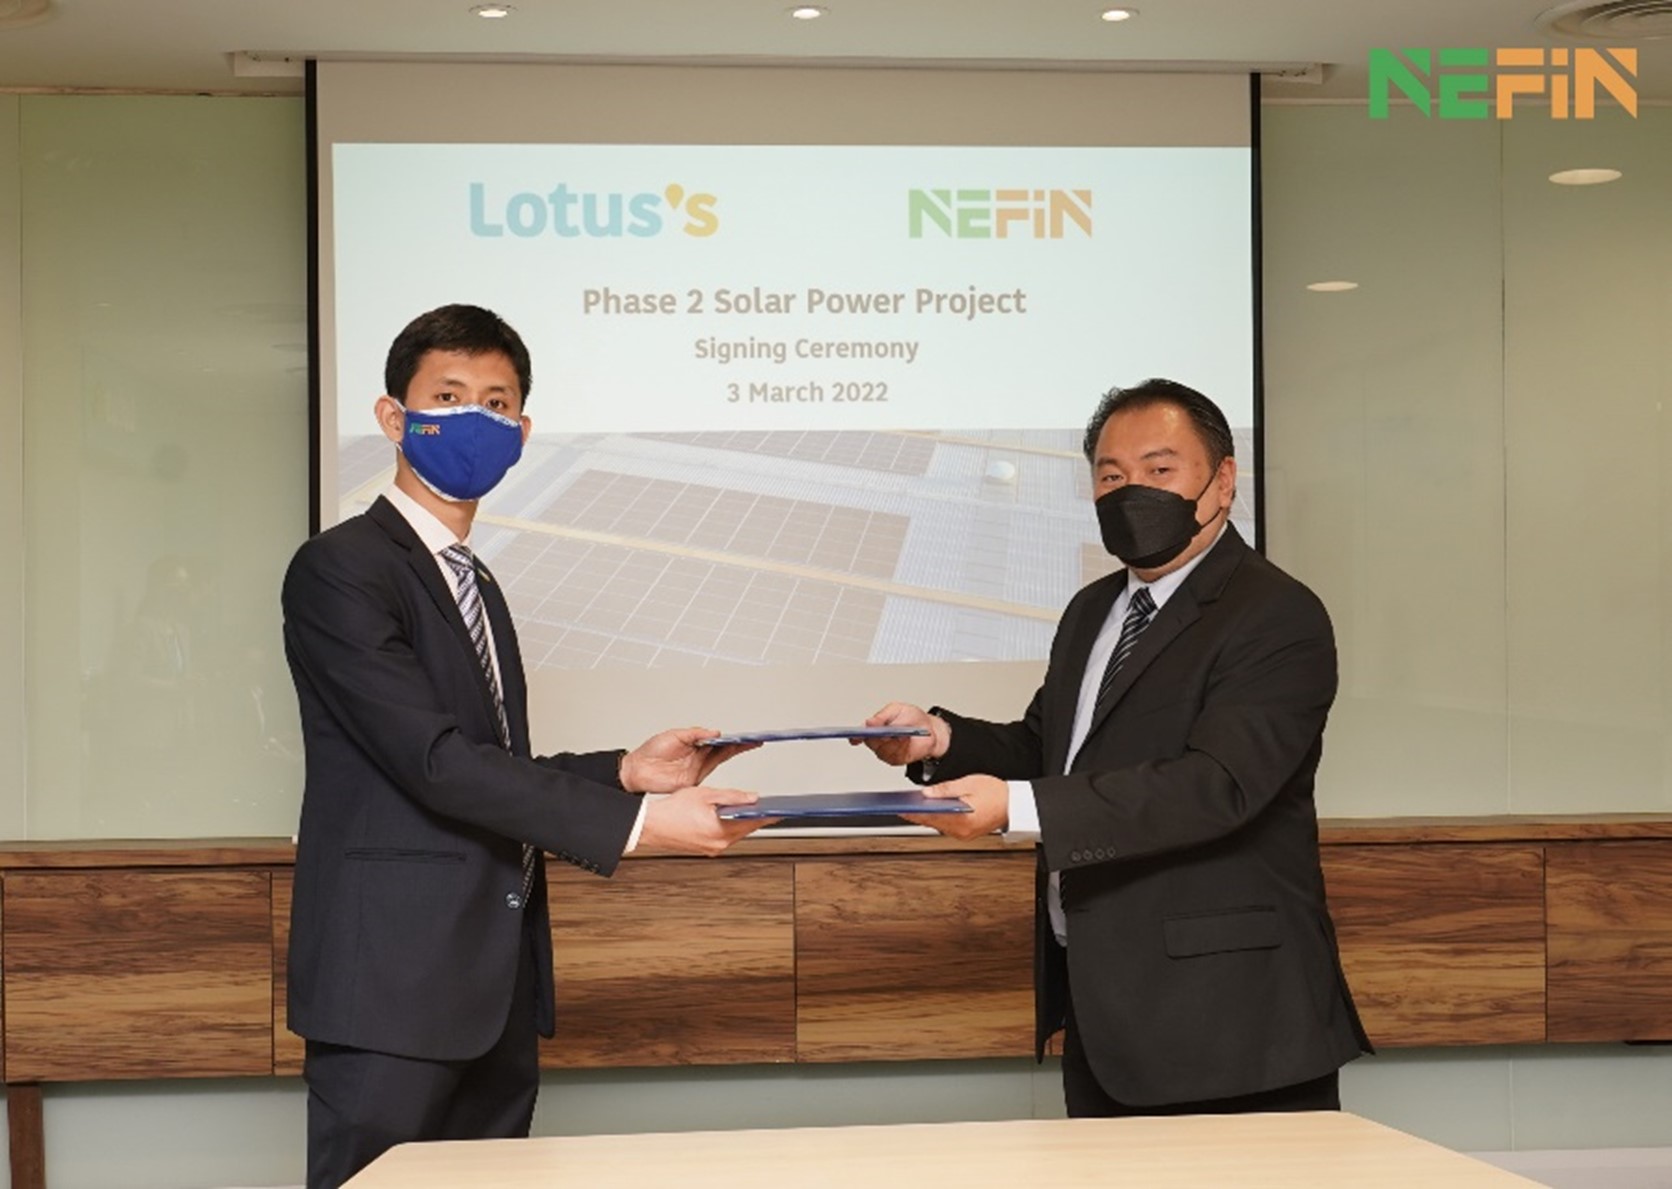 Lotus’s Malaysia awarded NEFIN to equip 12 more stores and one Distribution Centre with solar panels